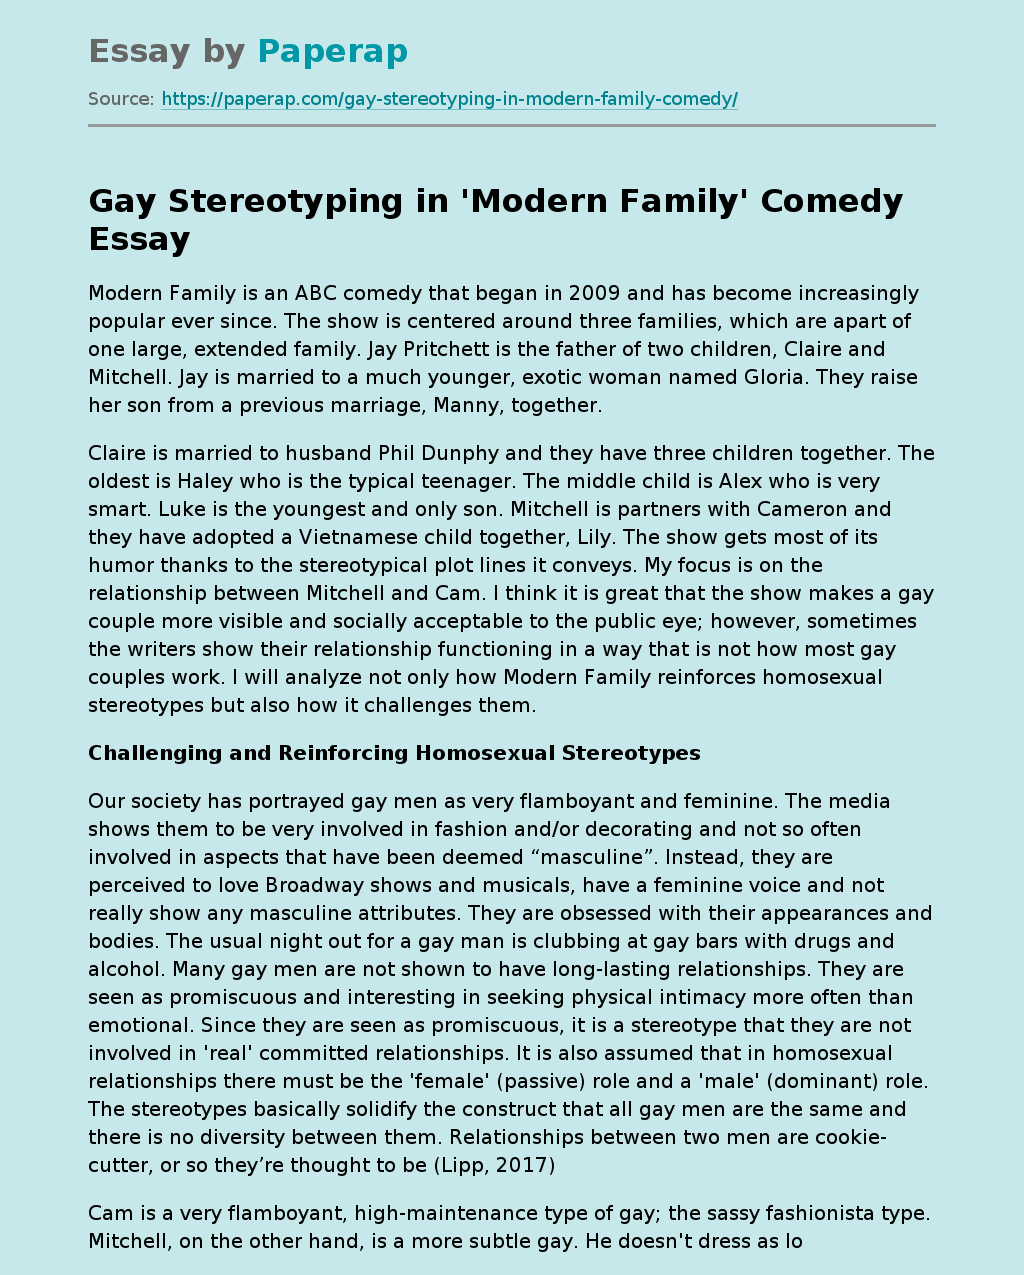 Gay Stereotyping in 'Modern Family' Comedy